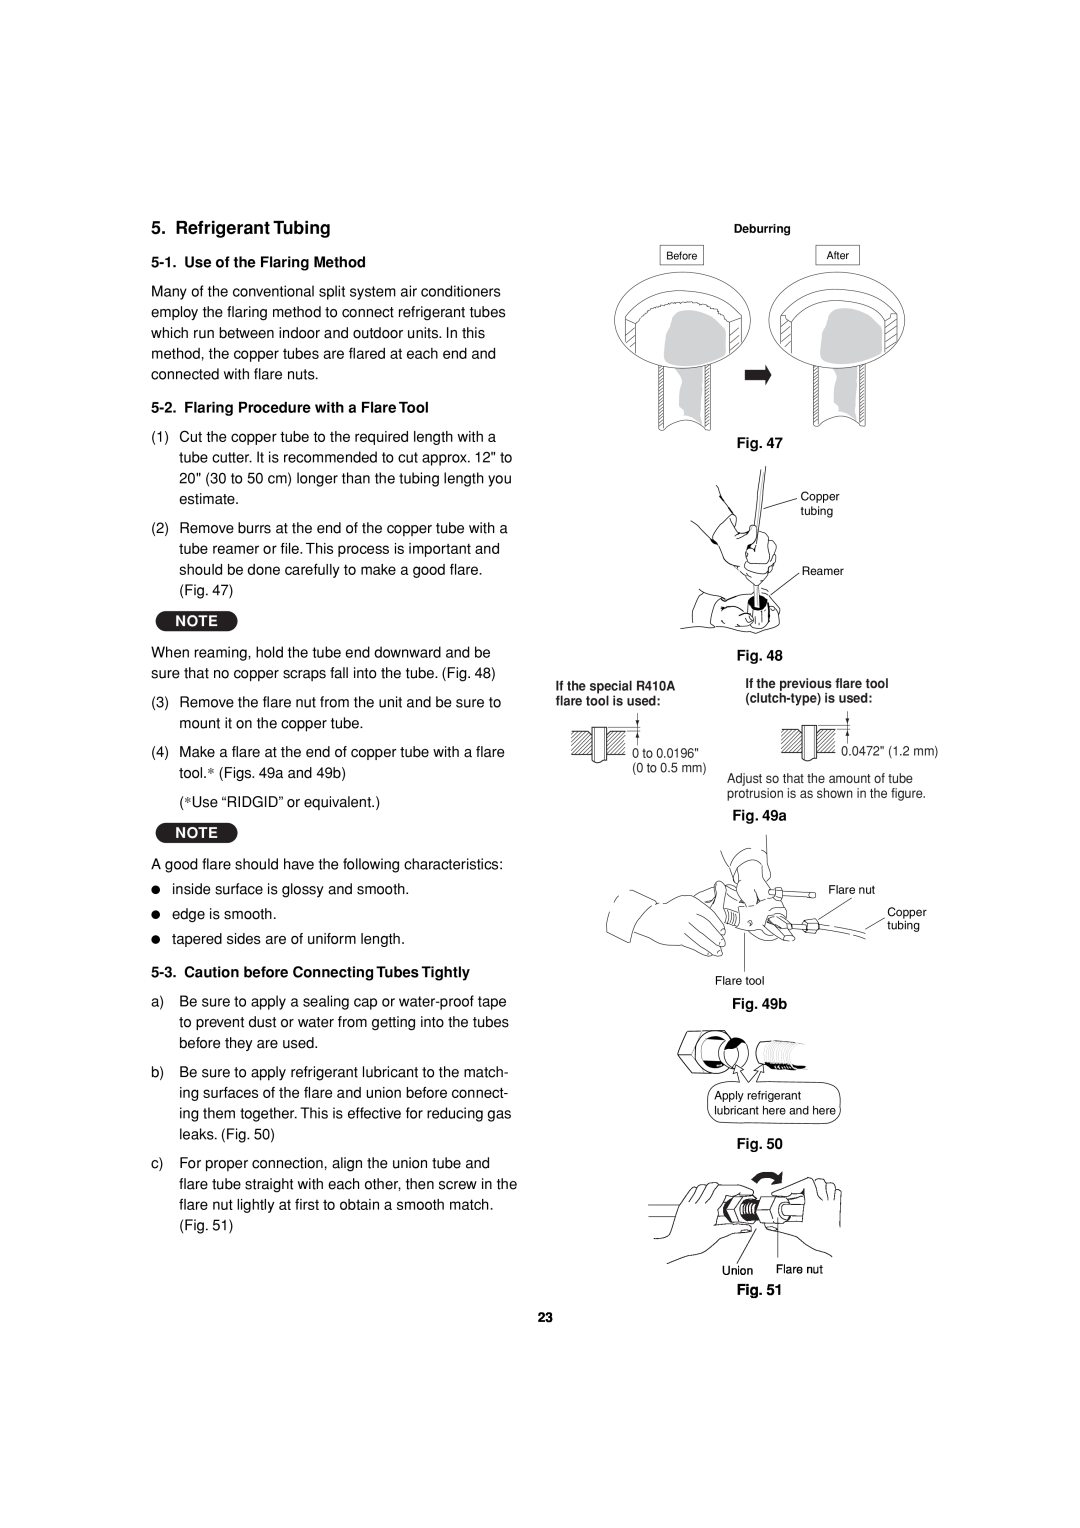 Sanyo C3682, C3082 service manual Refrigerant Tubing, Use of the Flaring Method, Flaring Procedure with a Flare Tool 